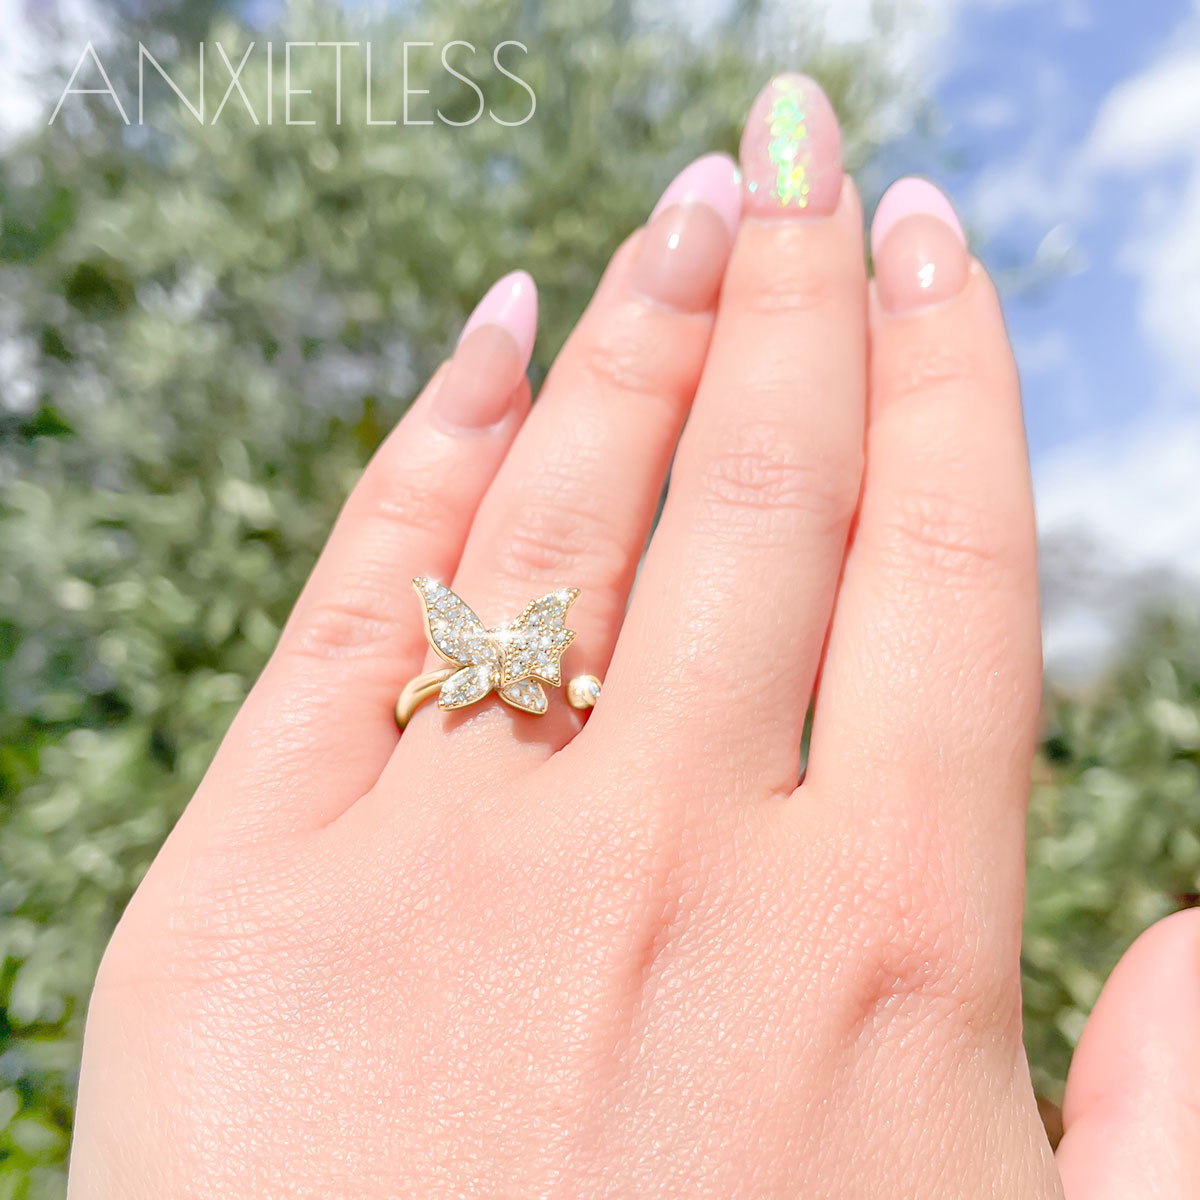 Woman's hand showcasing gold butterfly anxiety ring with star charm, against a backdrop of trees and sky